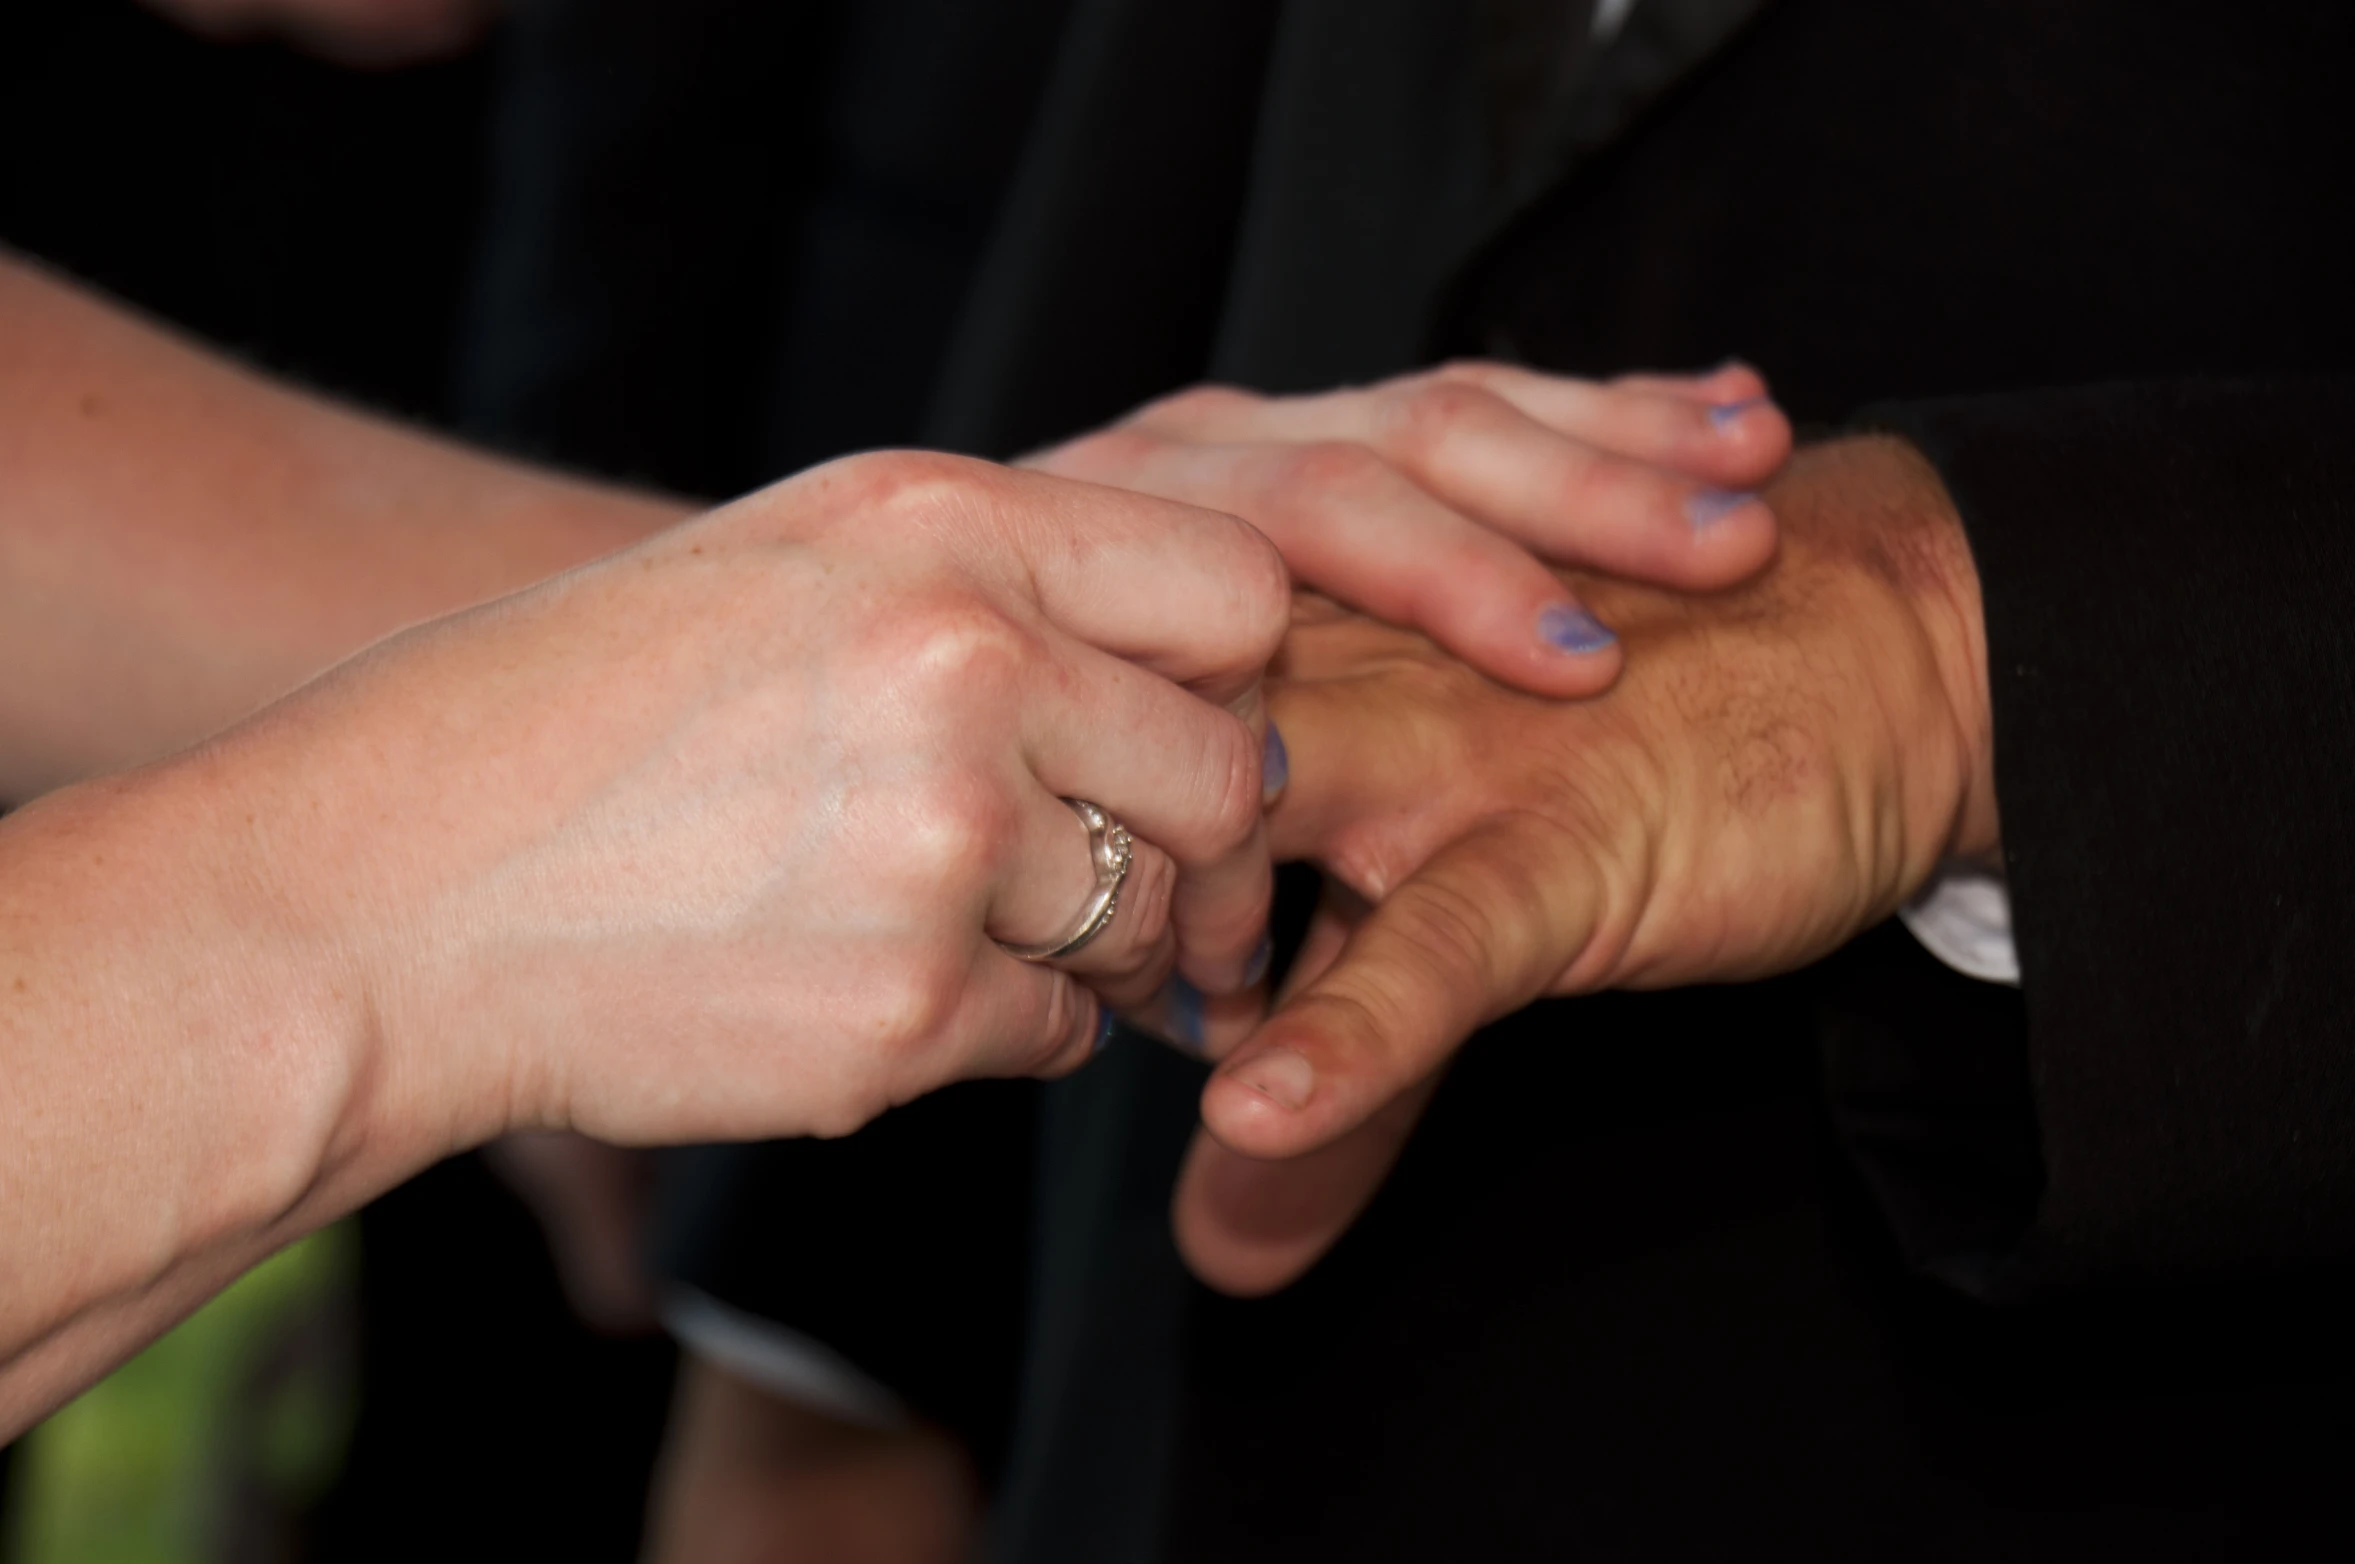 couple's hands are reaching each other over their wedding ring